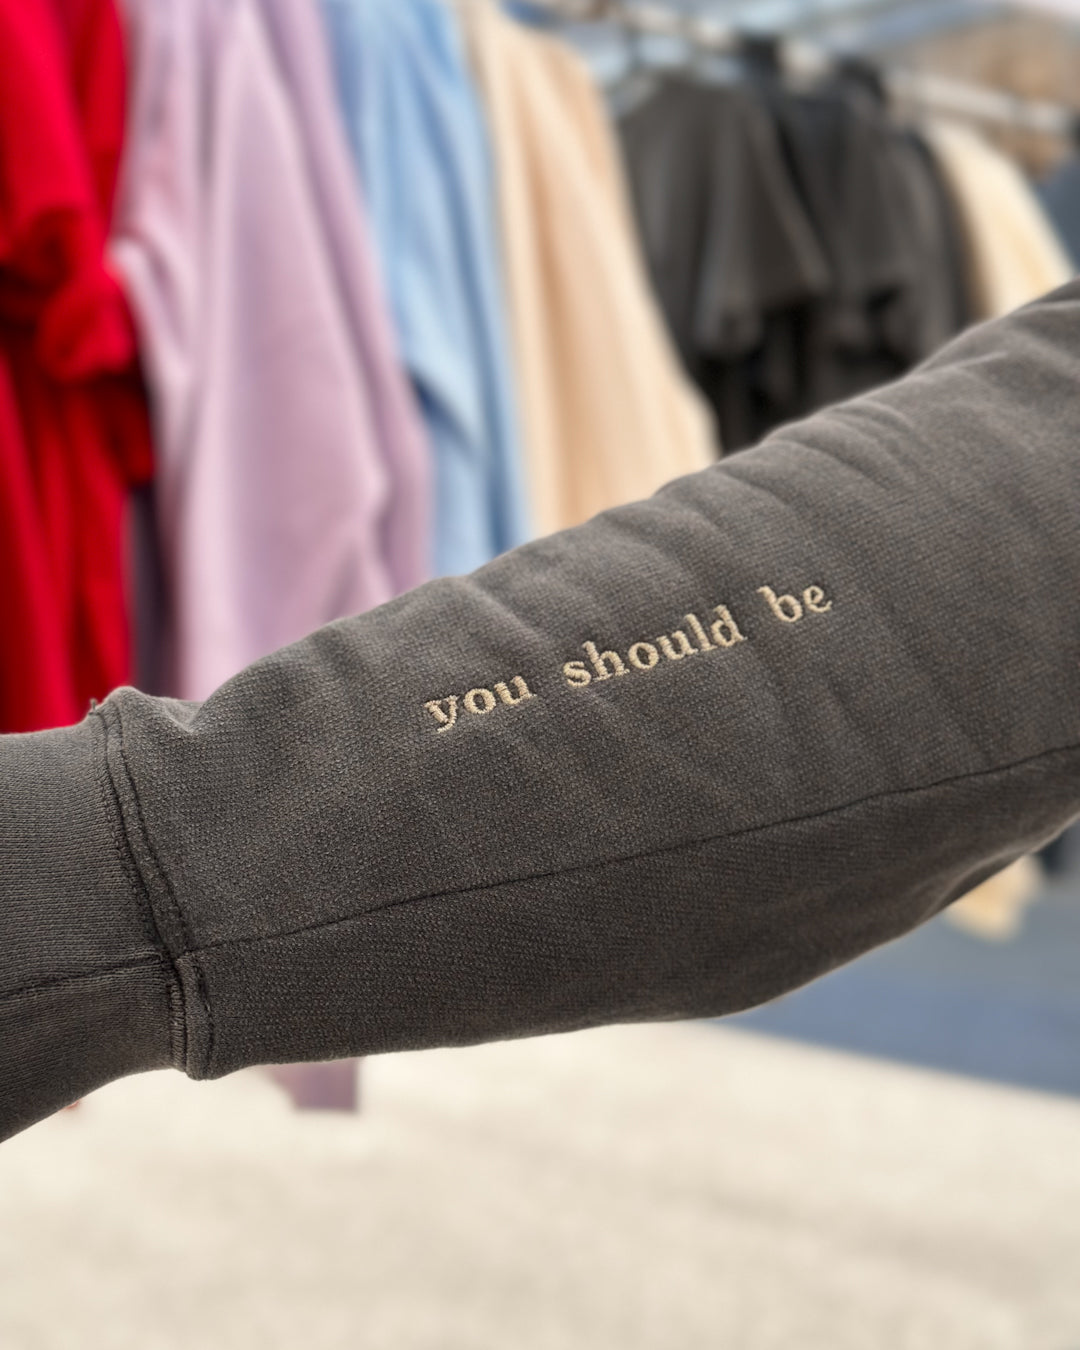 You Should Be Embroidered Comfort Colors Lightweight Sweatshirt